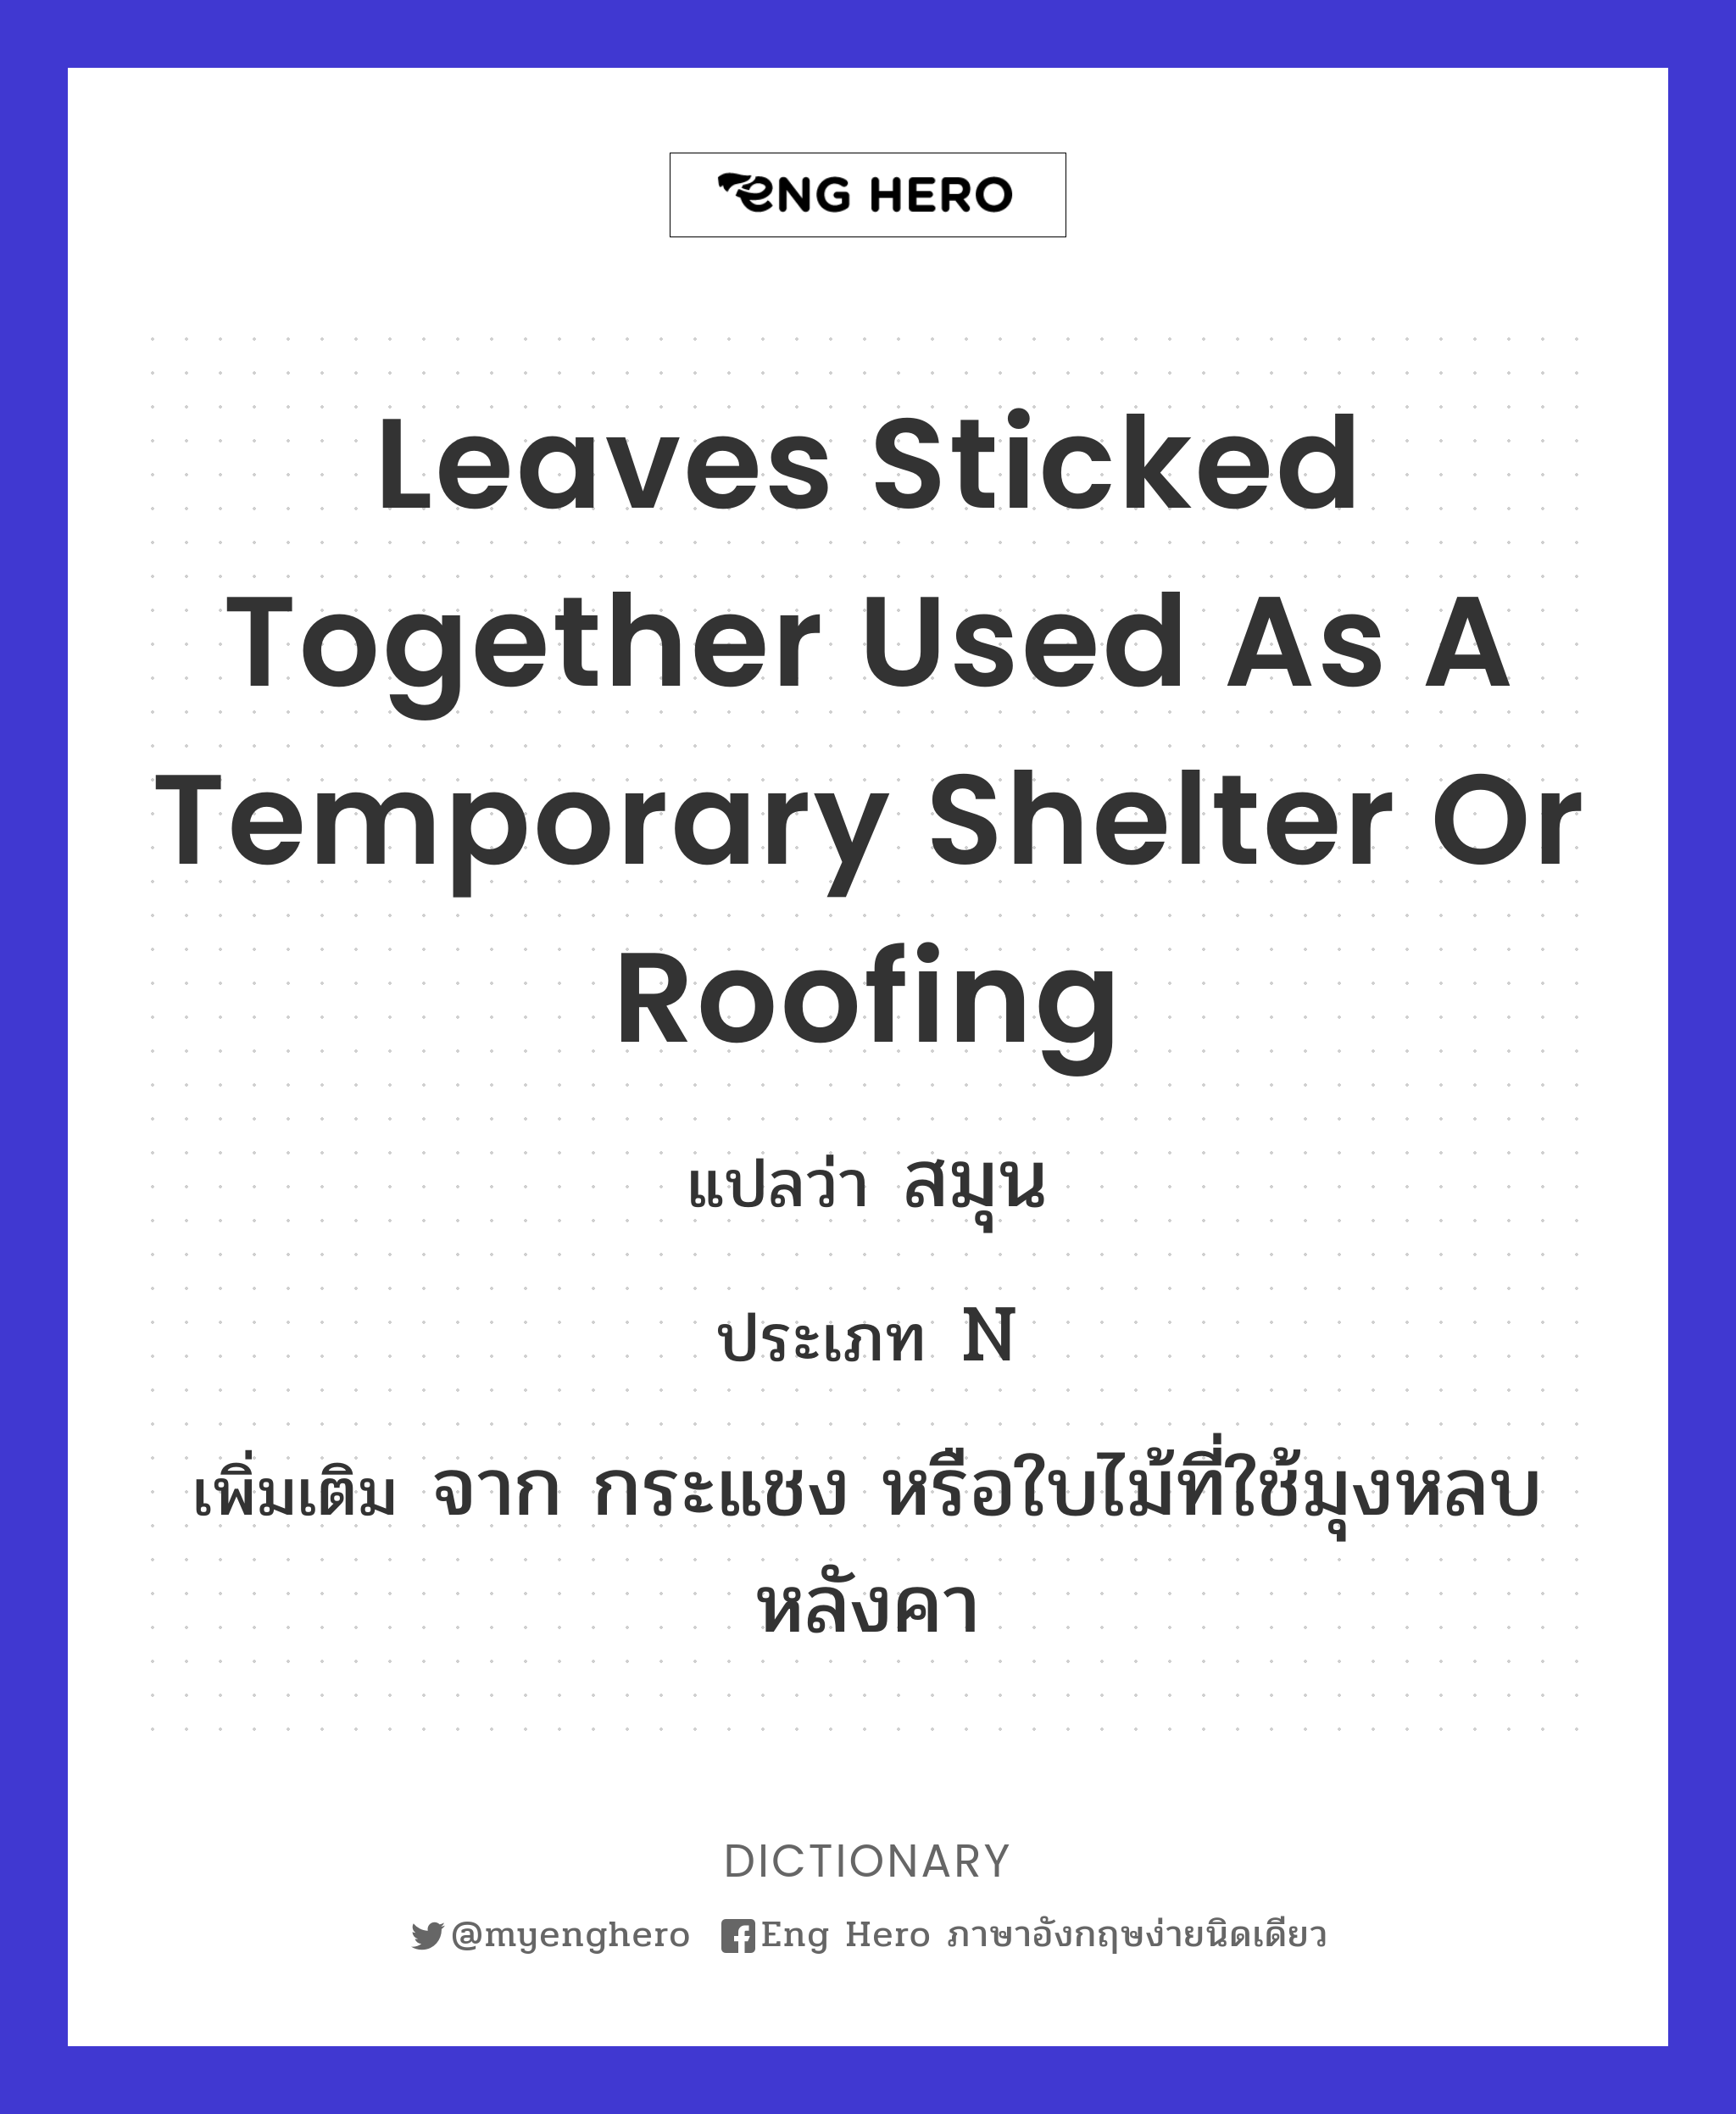 leaves sticked together used as a temporary shelter or roofing